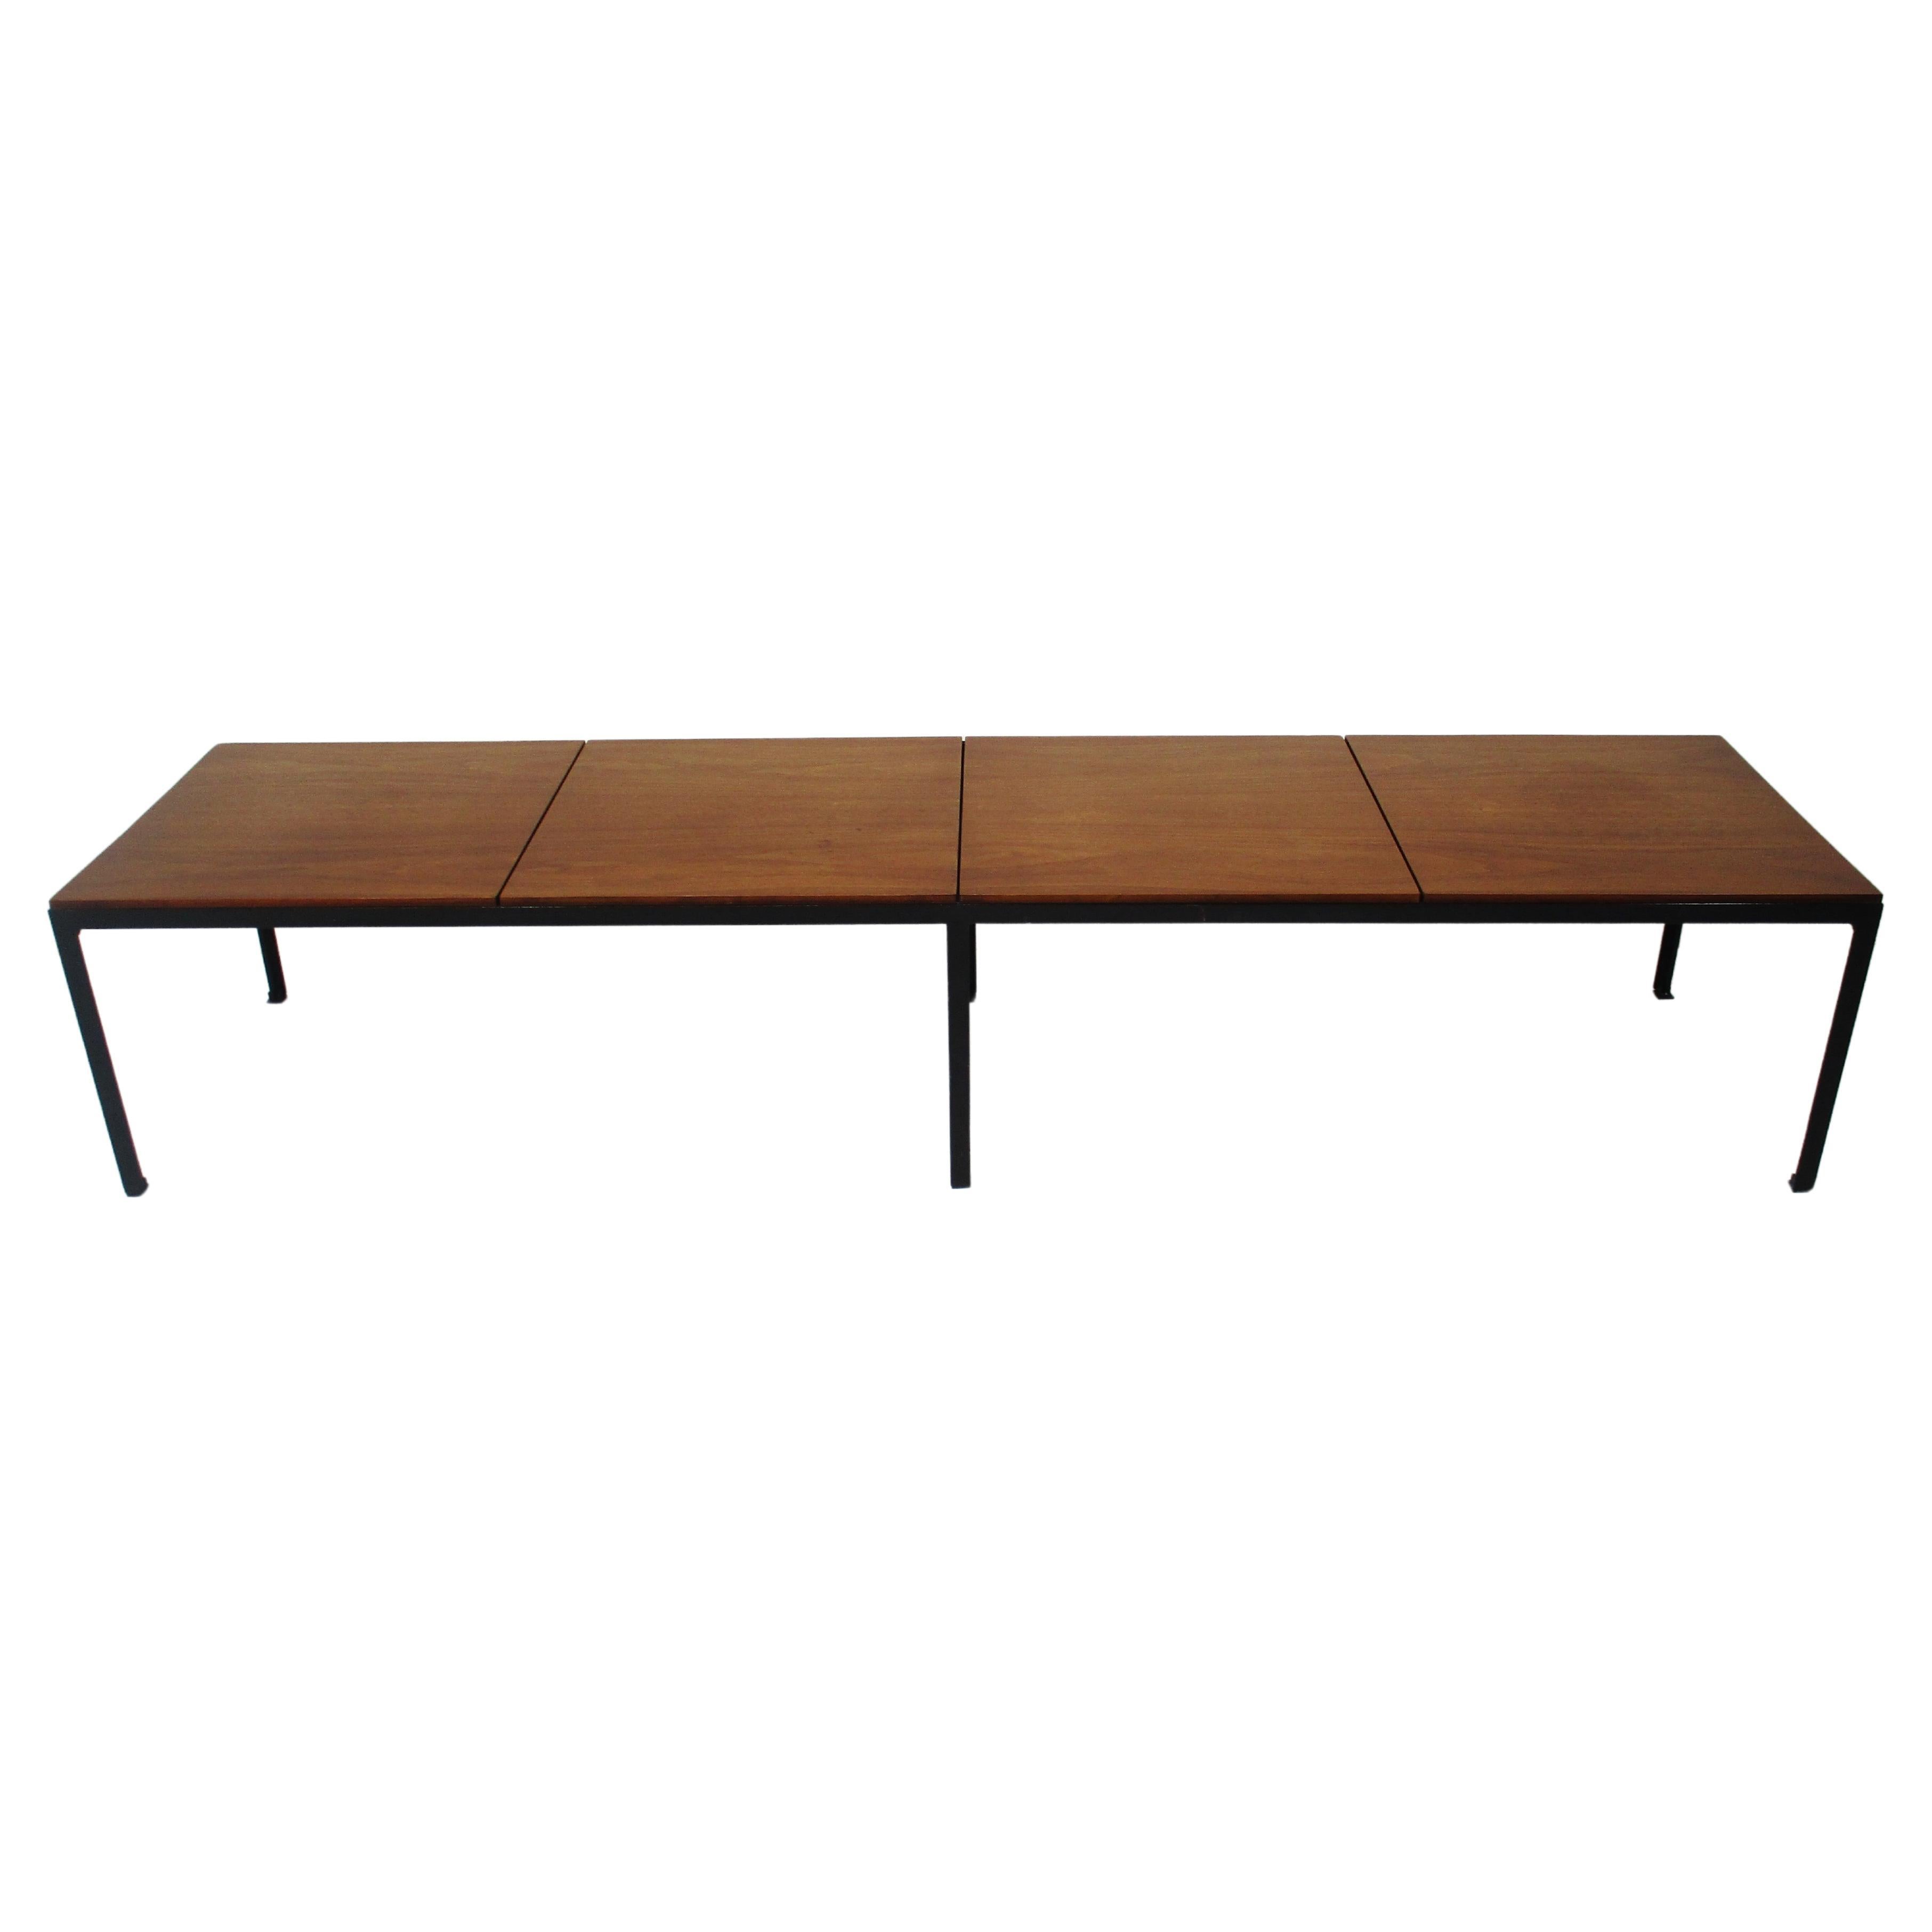 Early T Angle Walnut Coffee Table / Bench by Florence Knoll # 332 for Knoll (A) 